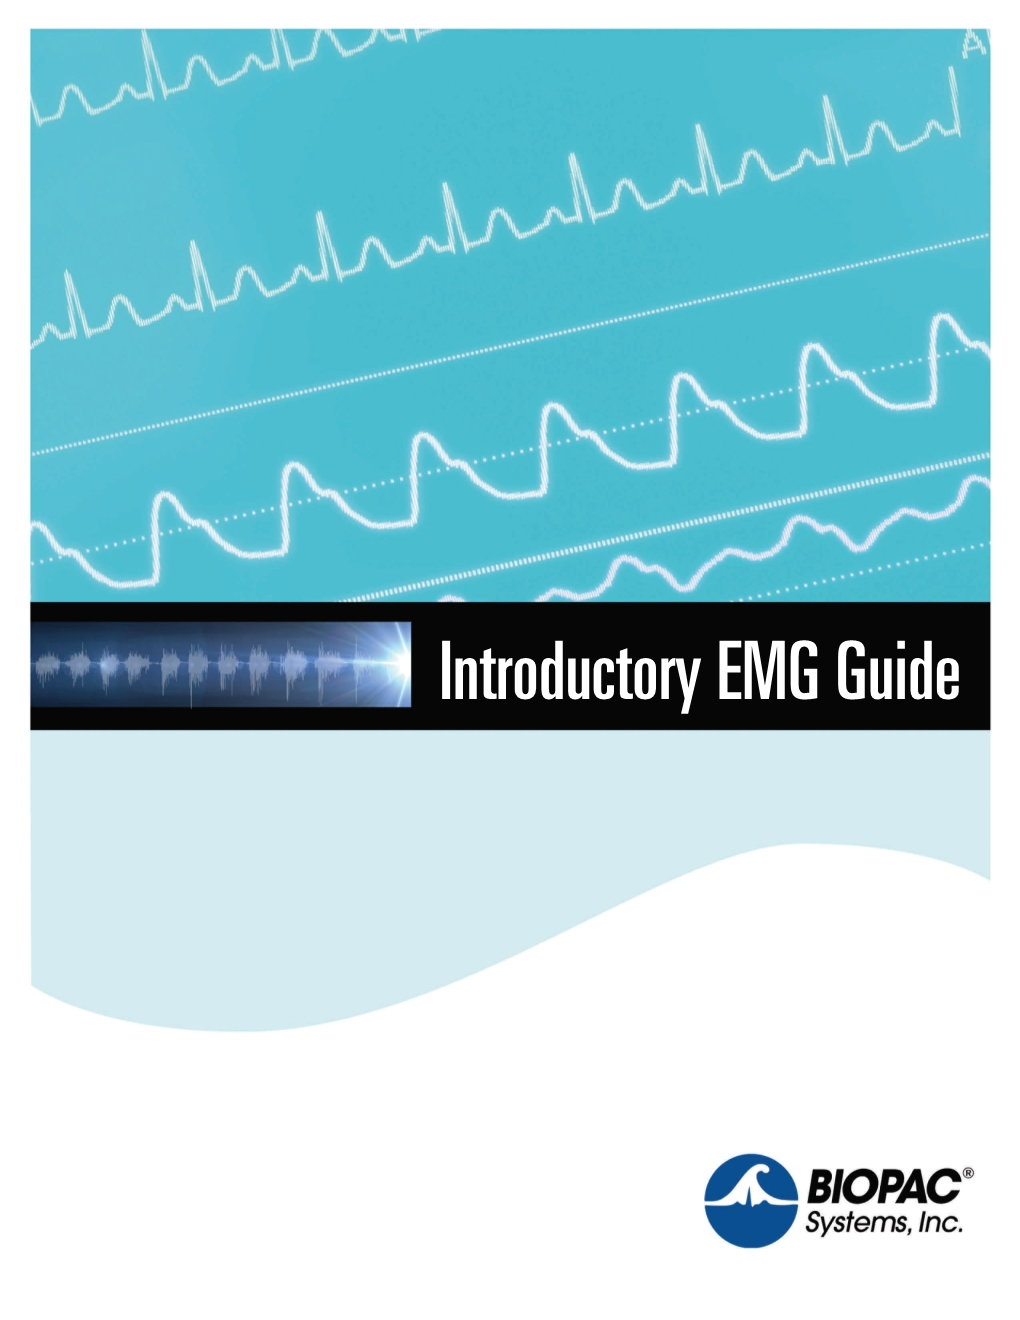 Introductory EMG Guide Introduction to EMG